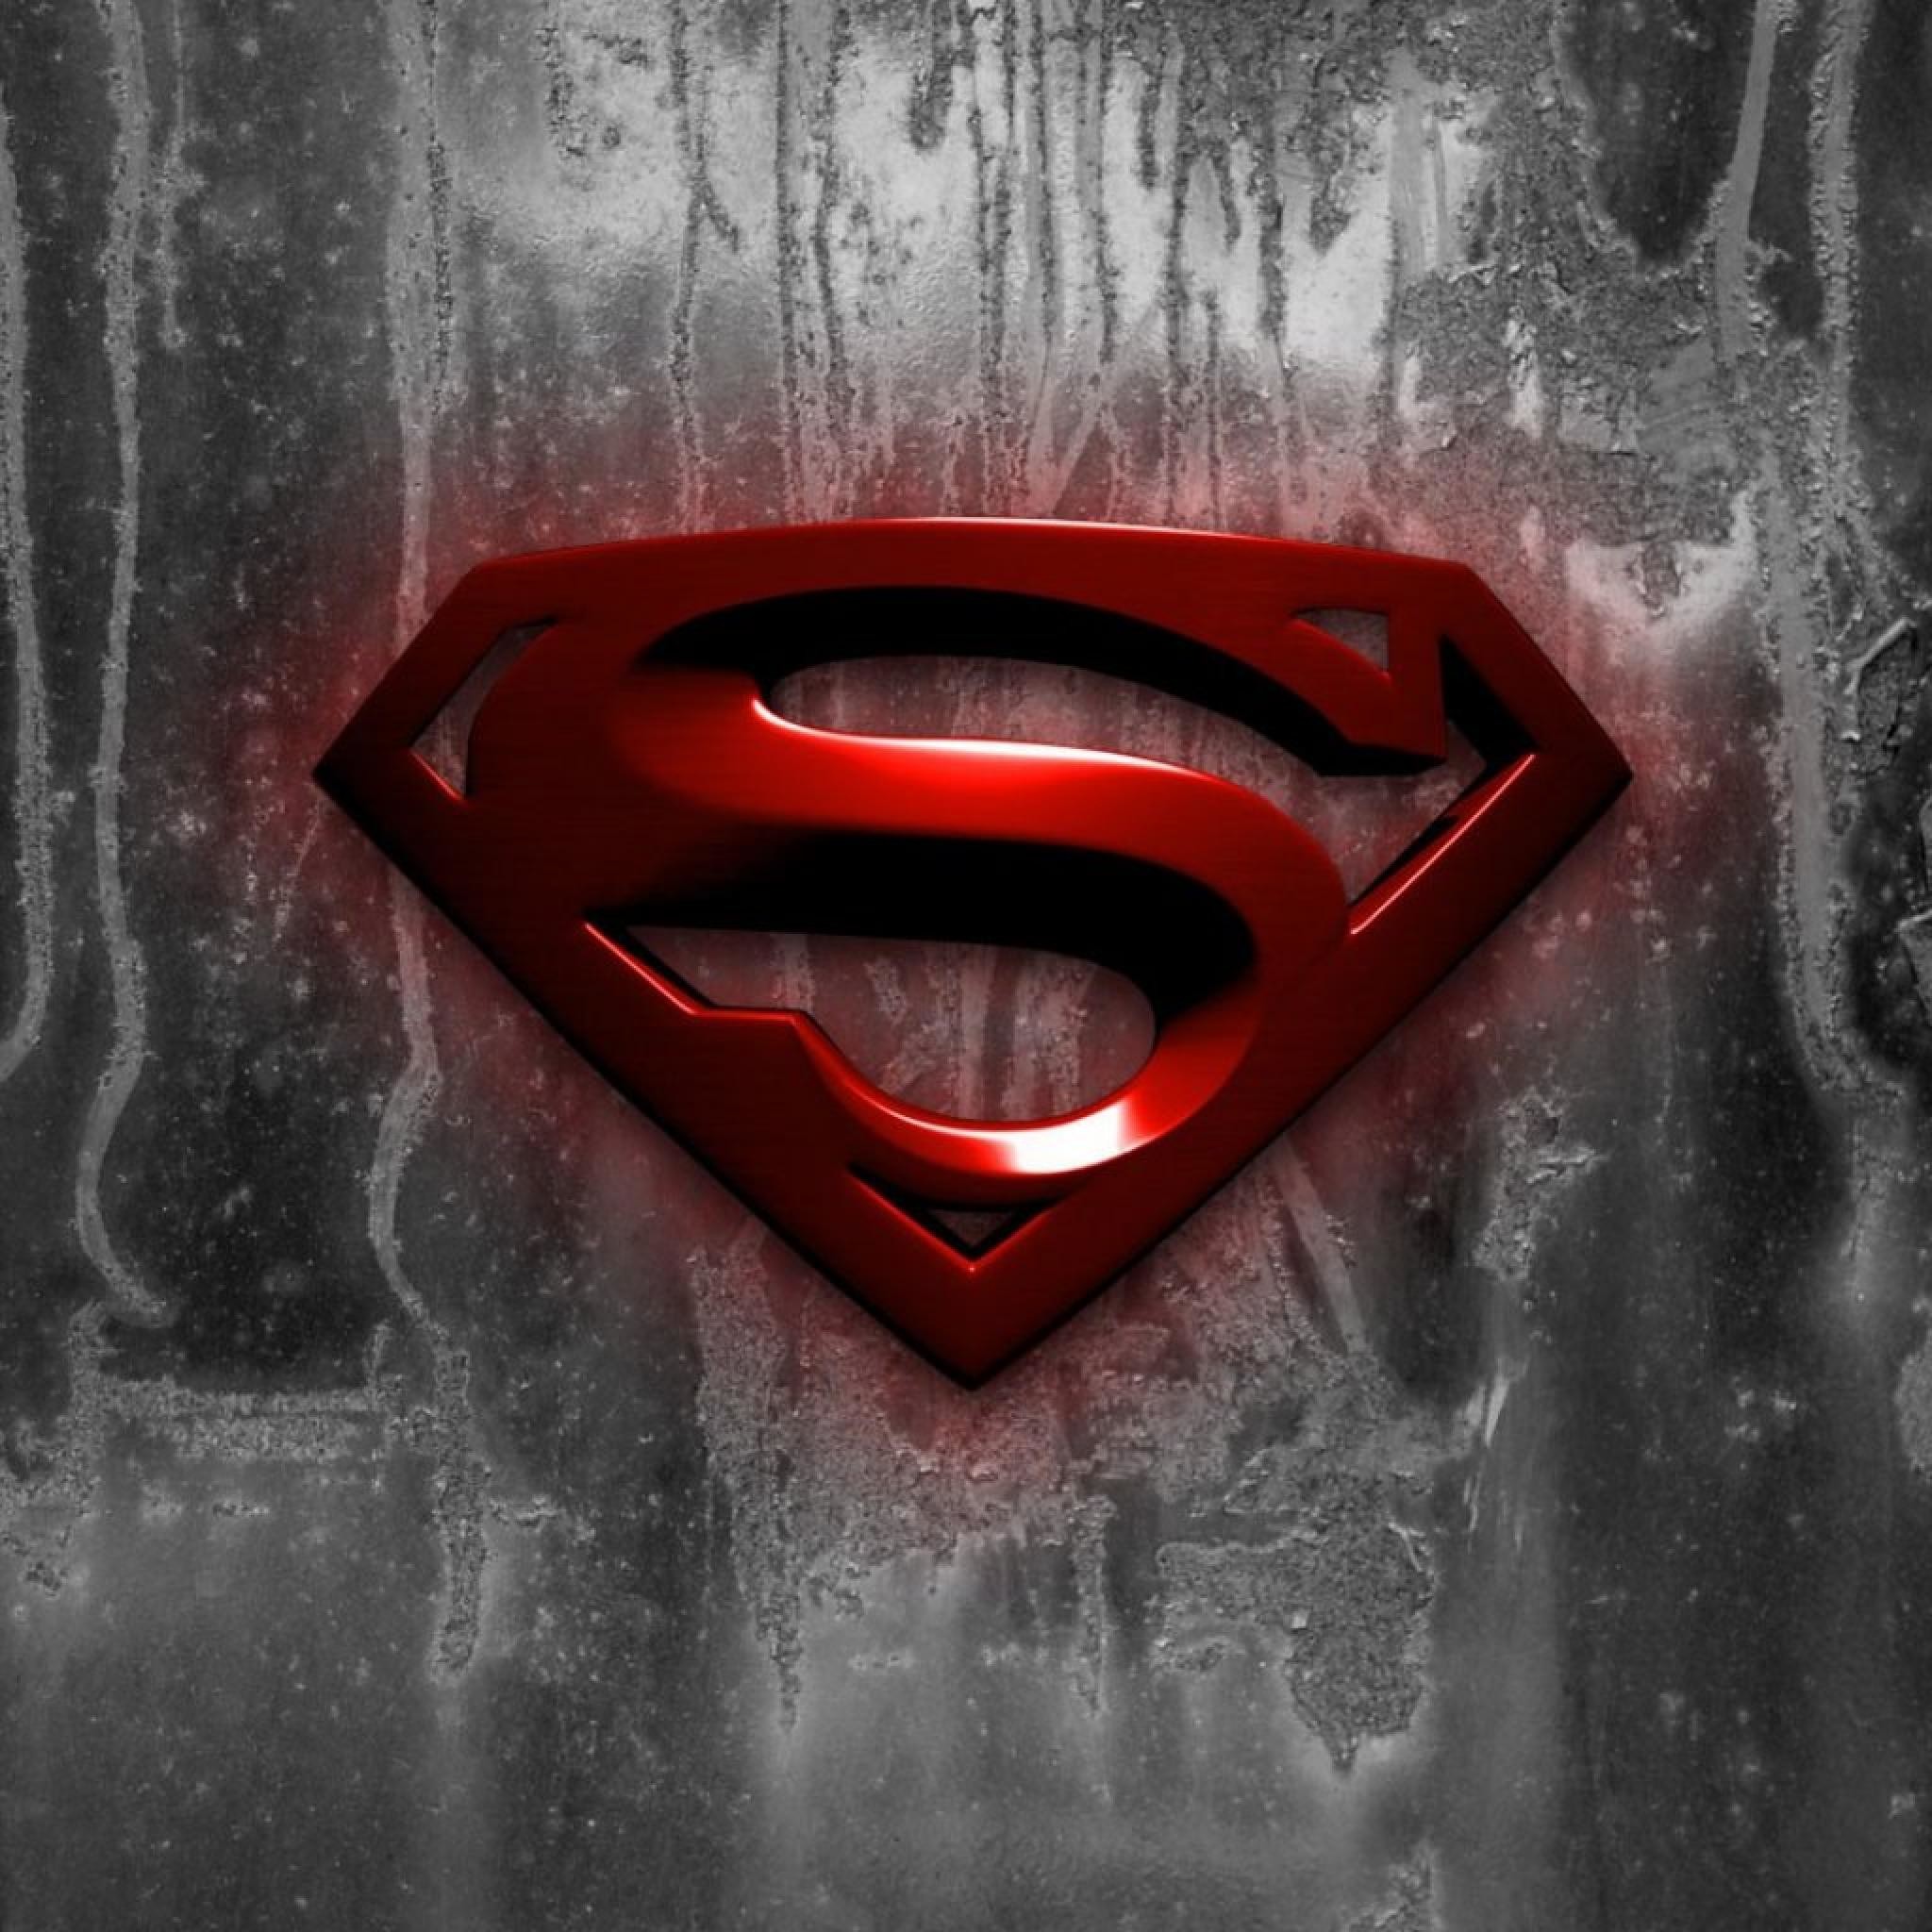 2048x2048 Search by Tags - Superman - iPad iPhone HD Wallpaper Free